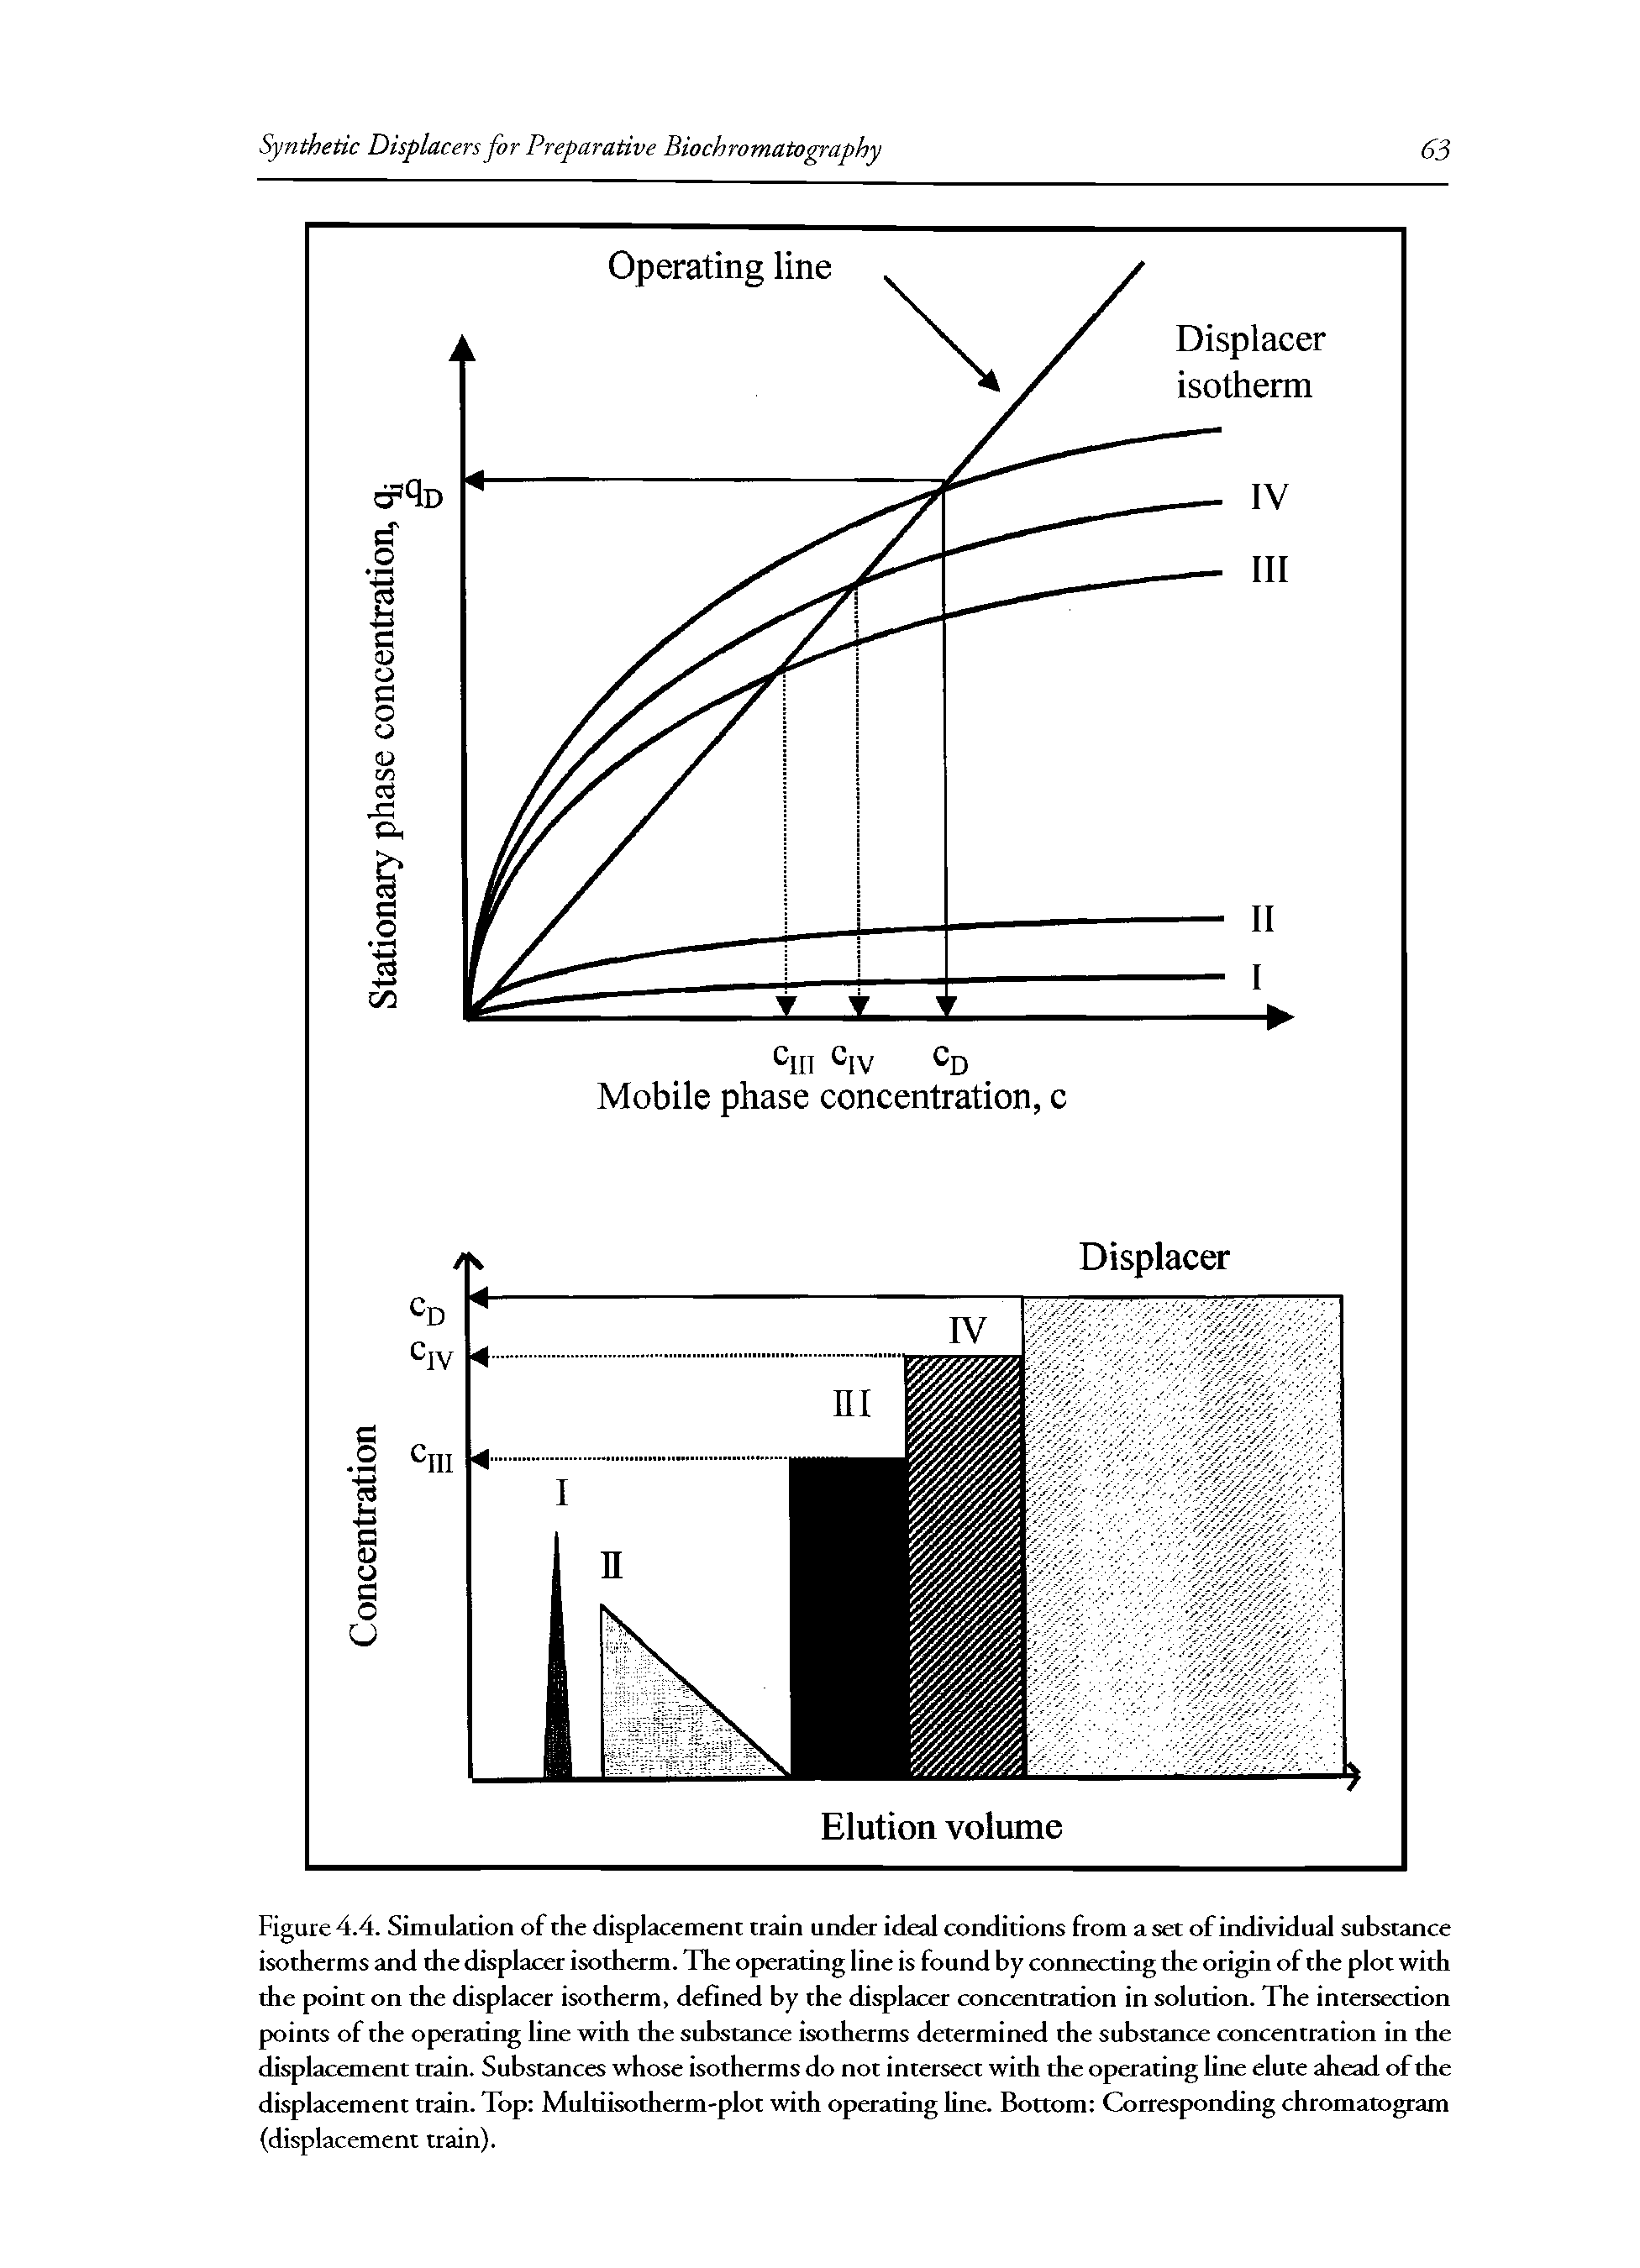 Figure 4.4. Simulation of the displacement train under ideal conditions from a set of individual substance isotherms and the displacer isotherm. The operating line is found by connecting the origin of the plot with the point on the displacer isotherm, defined by the displacer concentration in solution. The intersection points of the operating line with the substance isotherms determined the substance concentration in the displacement train. Substances whose isotherms do not intersect with the operating line elute ahead of the displacement train. Top Multiisotherm-plot with operating line. Bottom Corresponding chromatogram (displacement train).